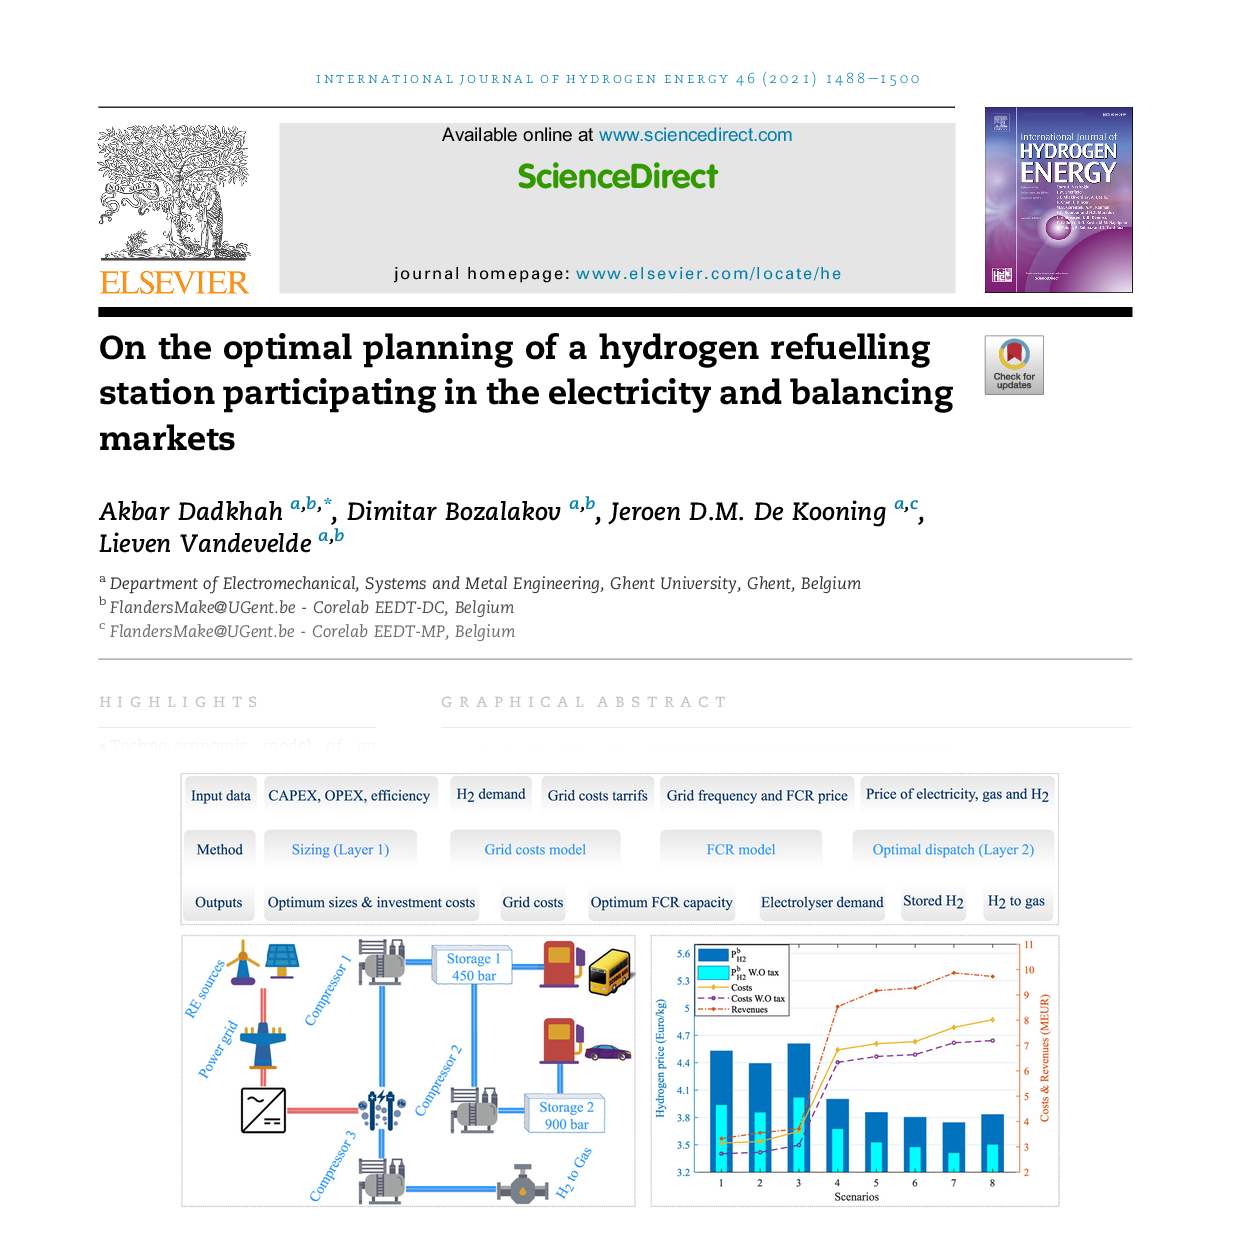 On the optimal planning of a hydrogen refuelling station participating in the electricity and balancing markets